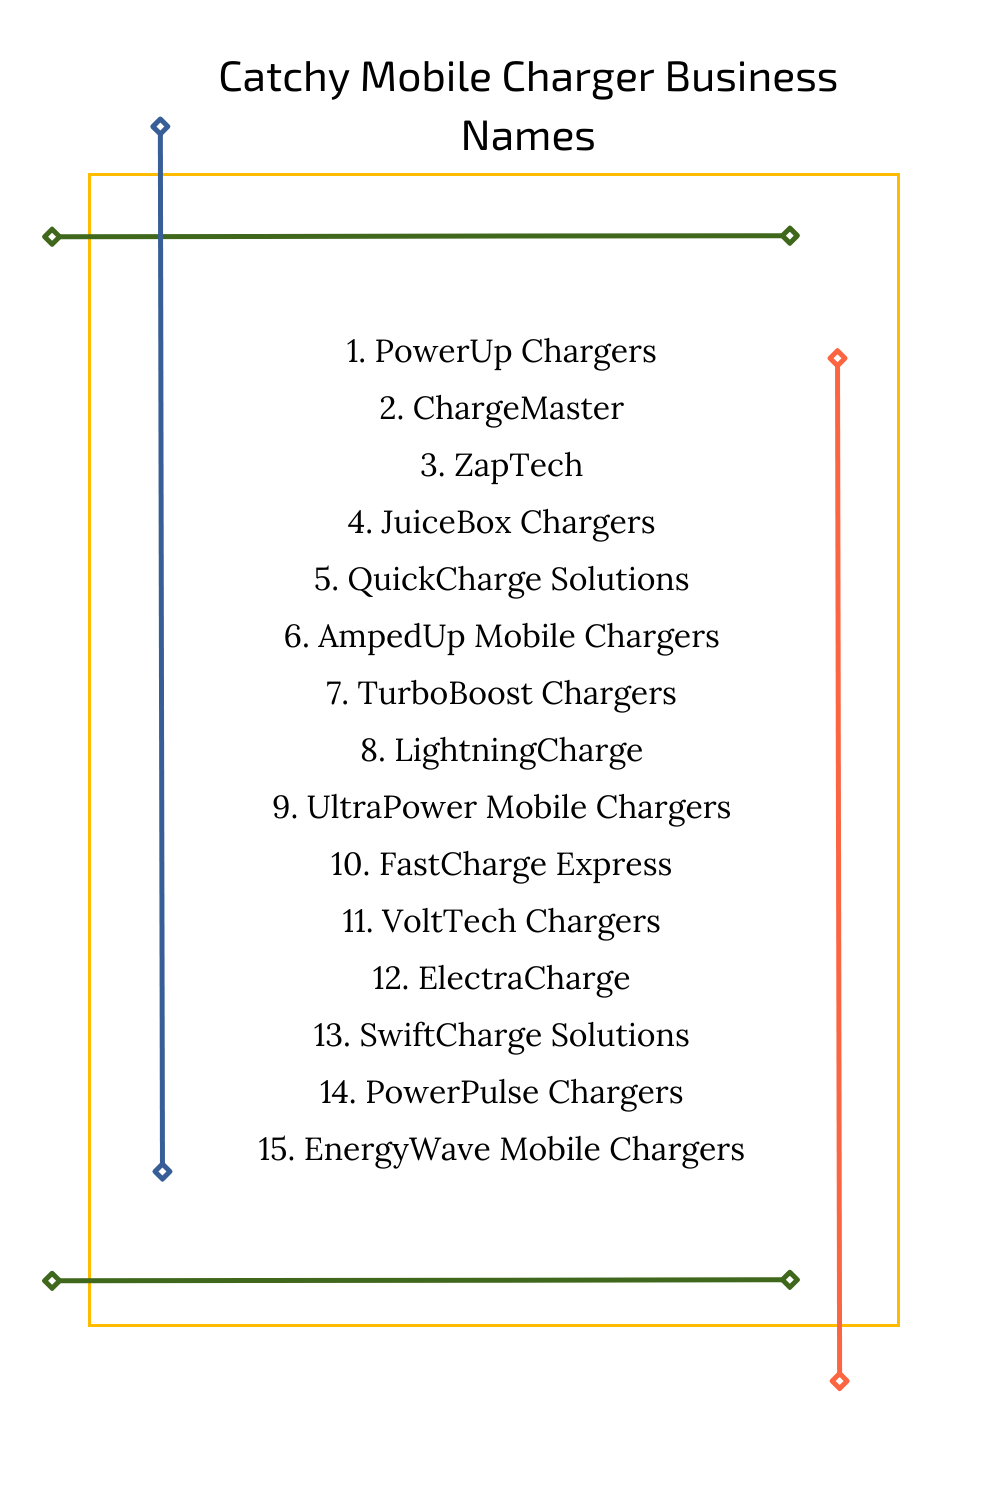 Catchy Mobile Charger Business Names